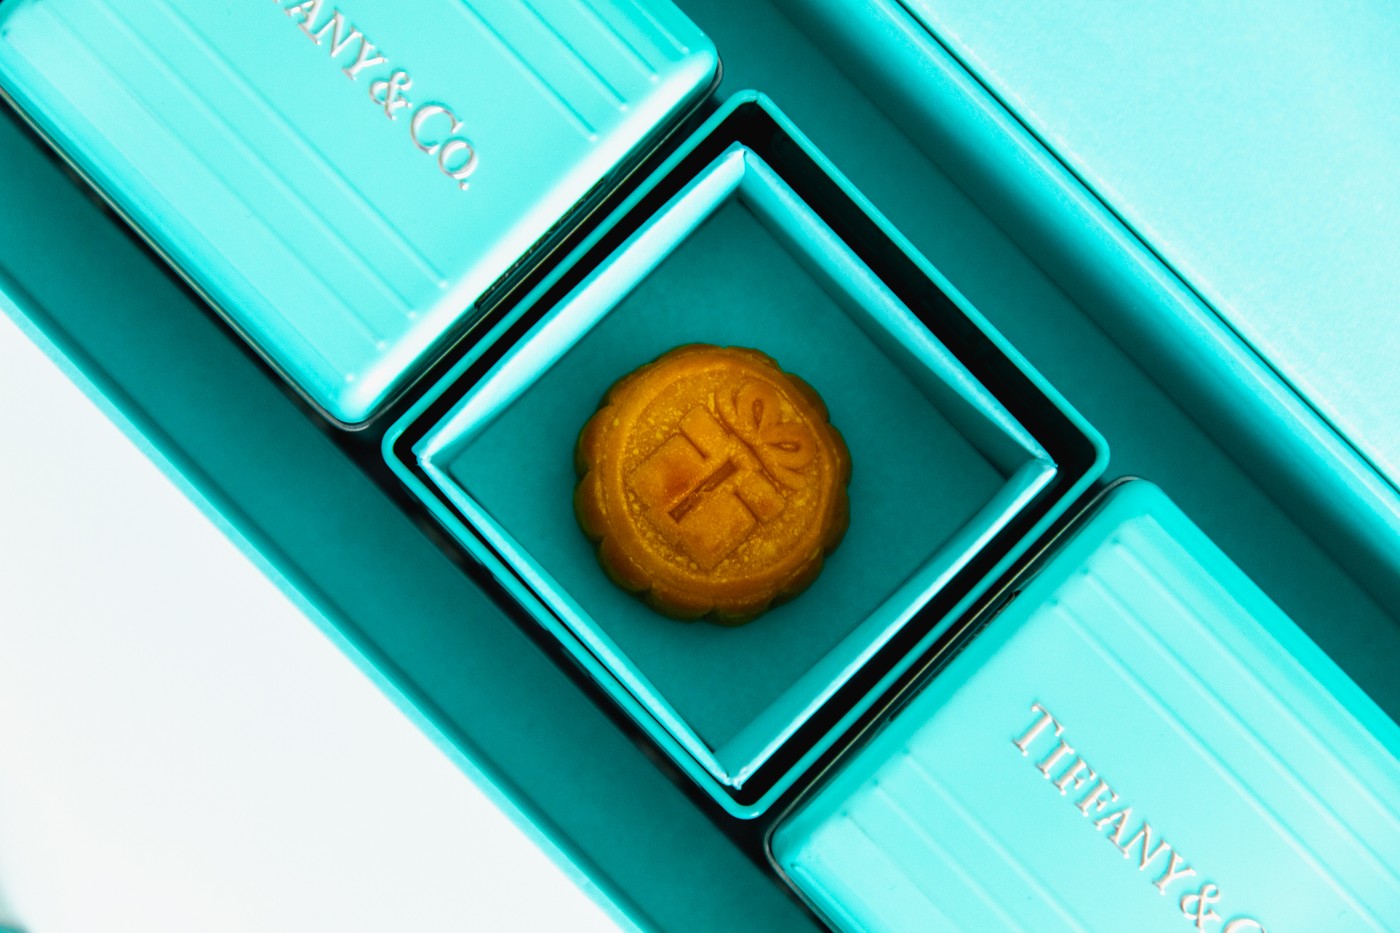 Mooncakes by Tiffany & Co.